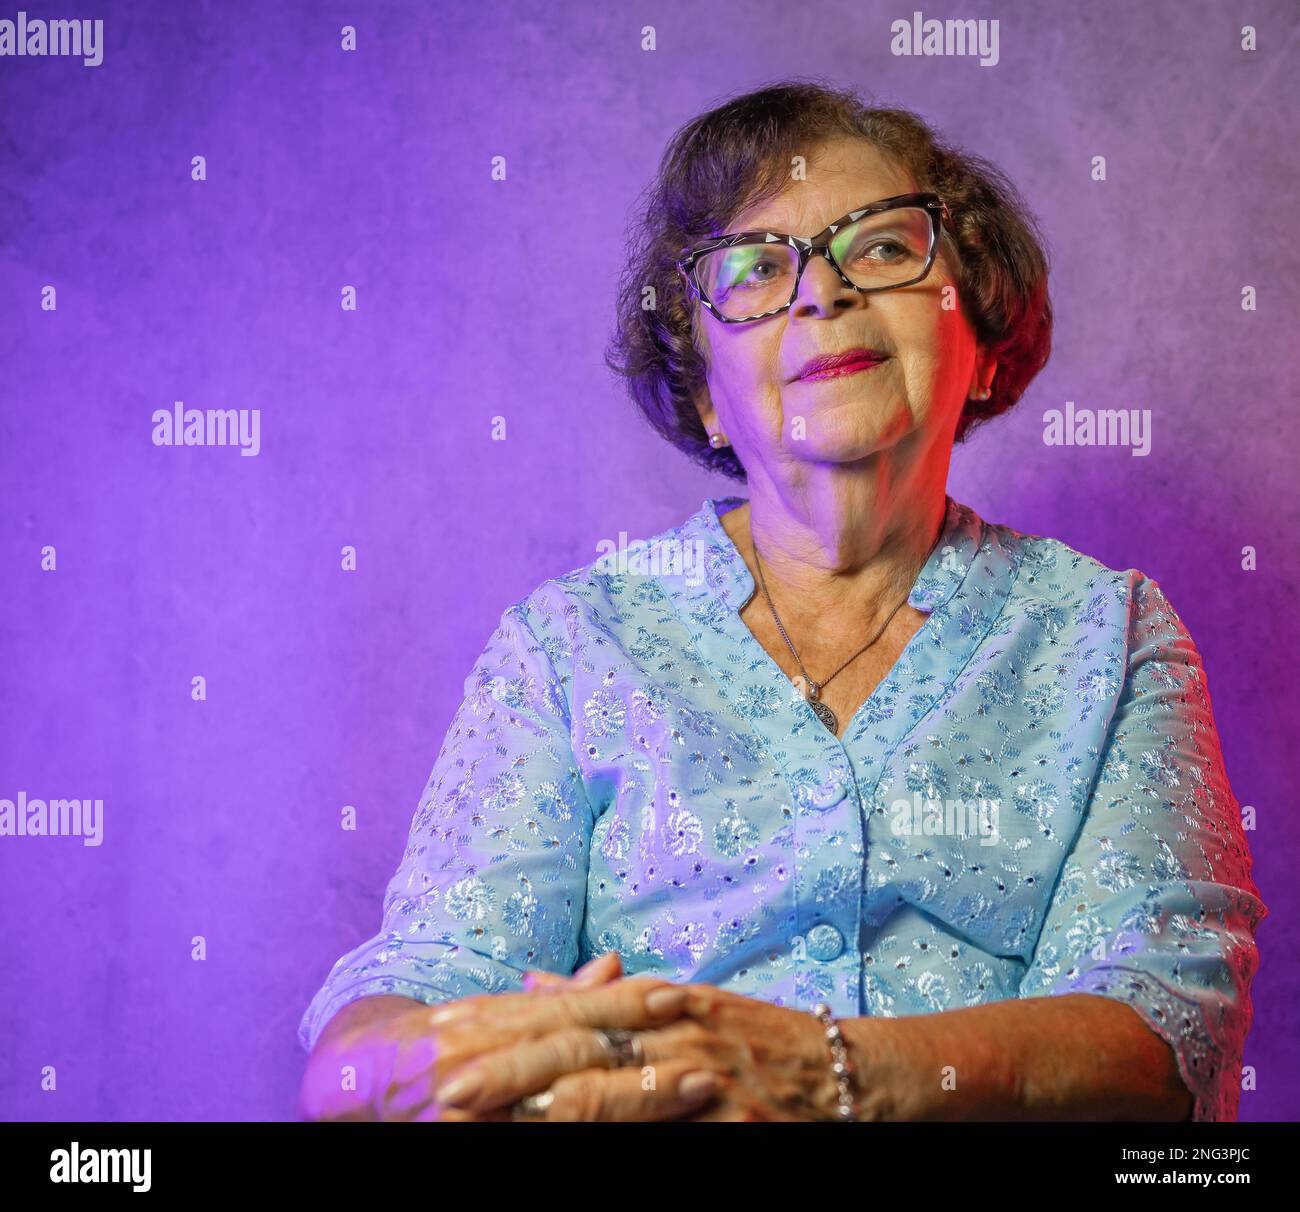 Portrait of an old lady with blue dress and purple lighting Stock Photo